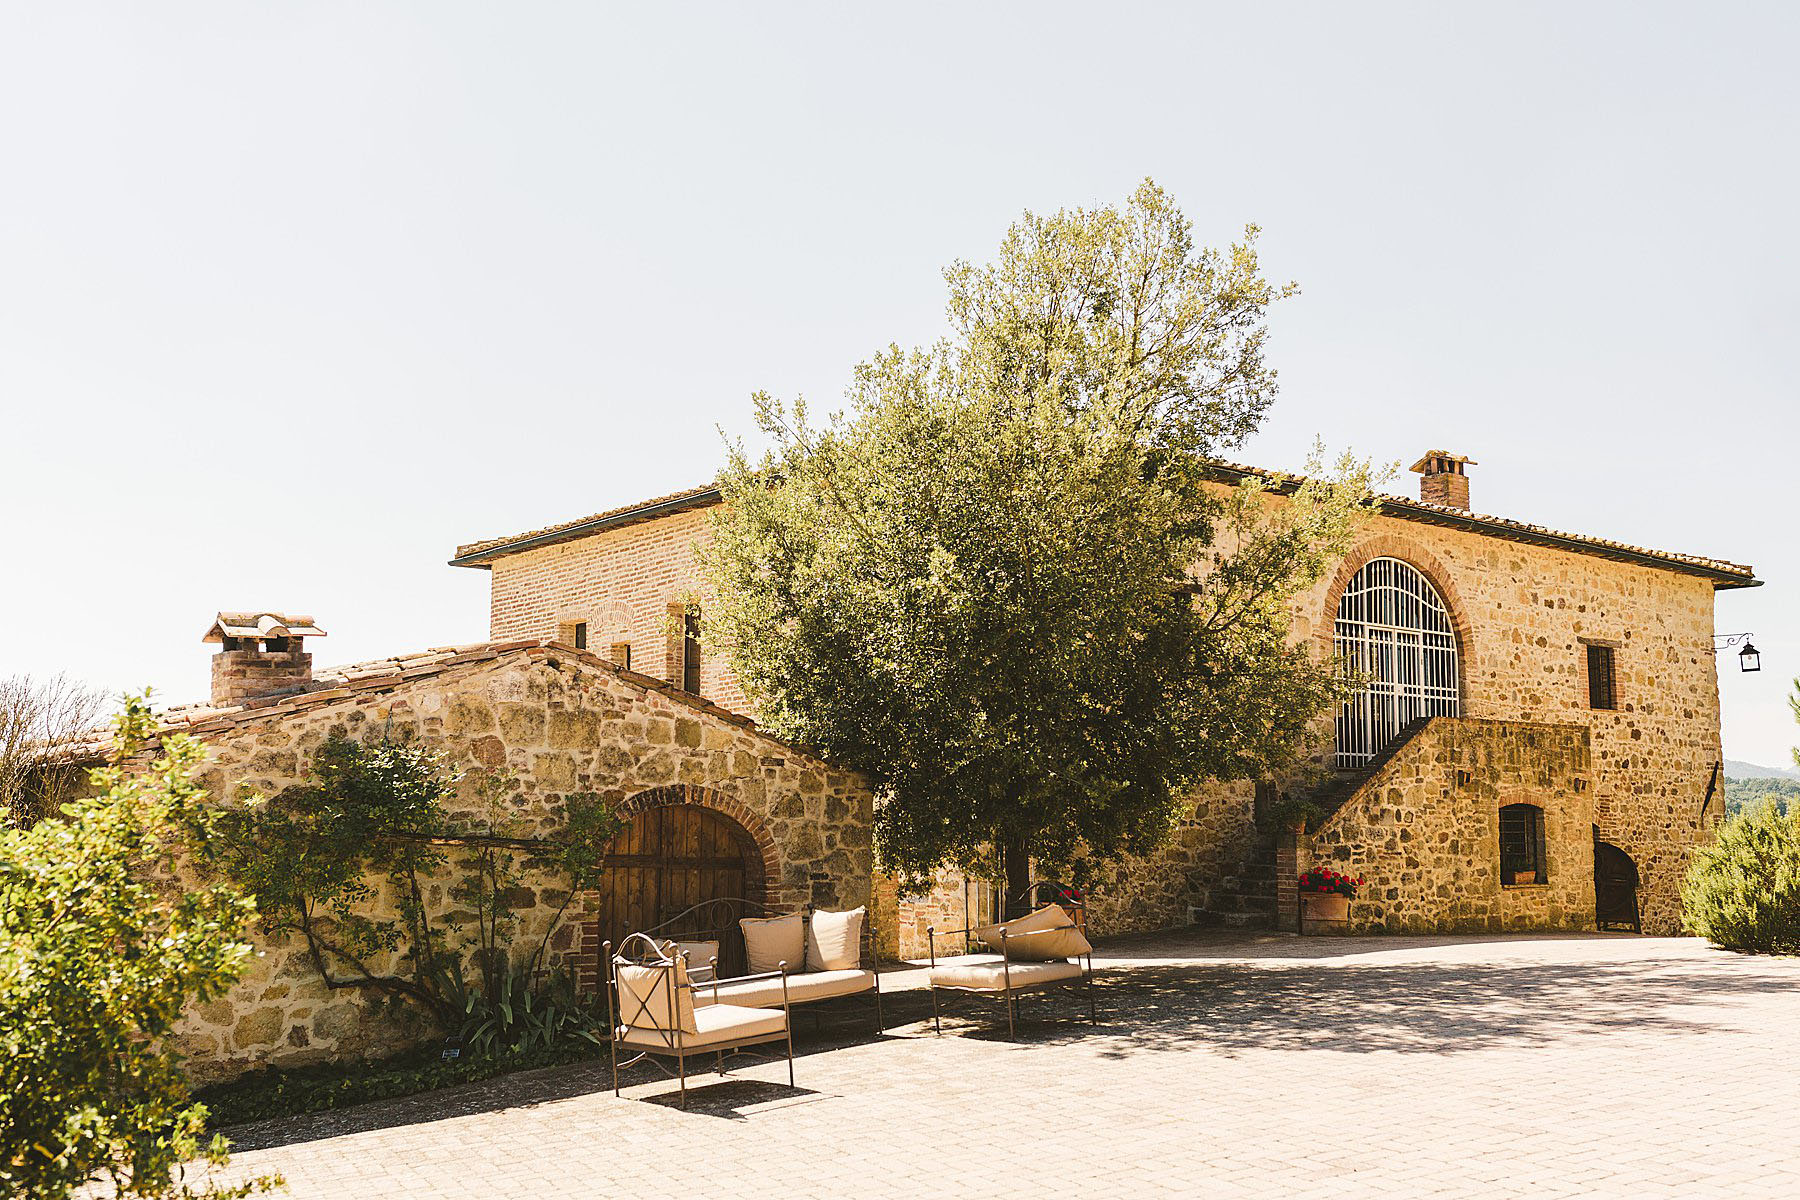 Tenuta di Papena is a perfect wedding venue located in the heart of Tuscany near Siena and the Roofless Abbey of San Galgano